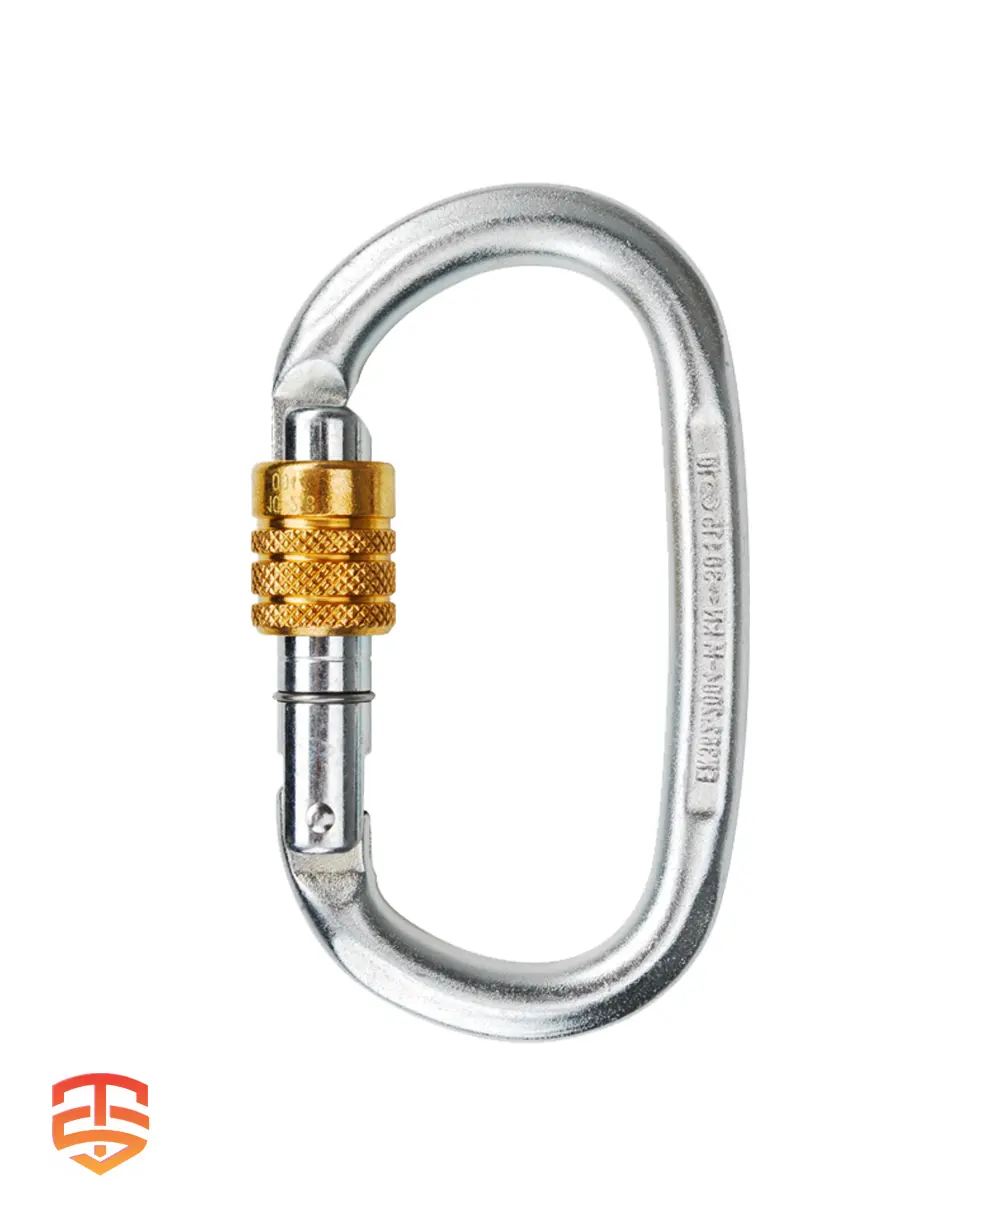 Edelrid STEEL OVAL SCREW Carabiner - Wholesale prices - Global shipping